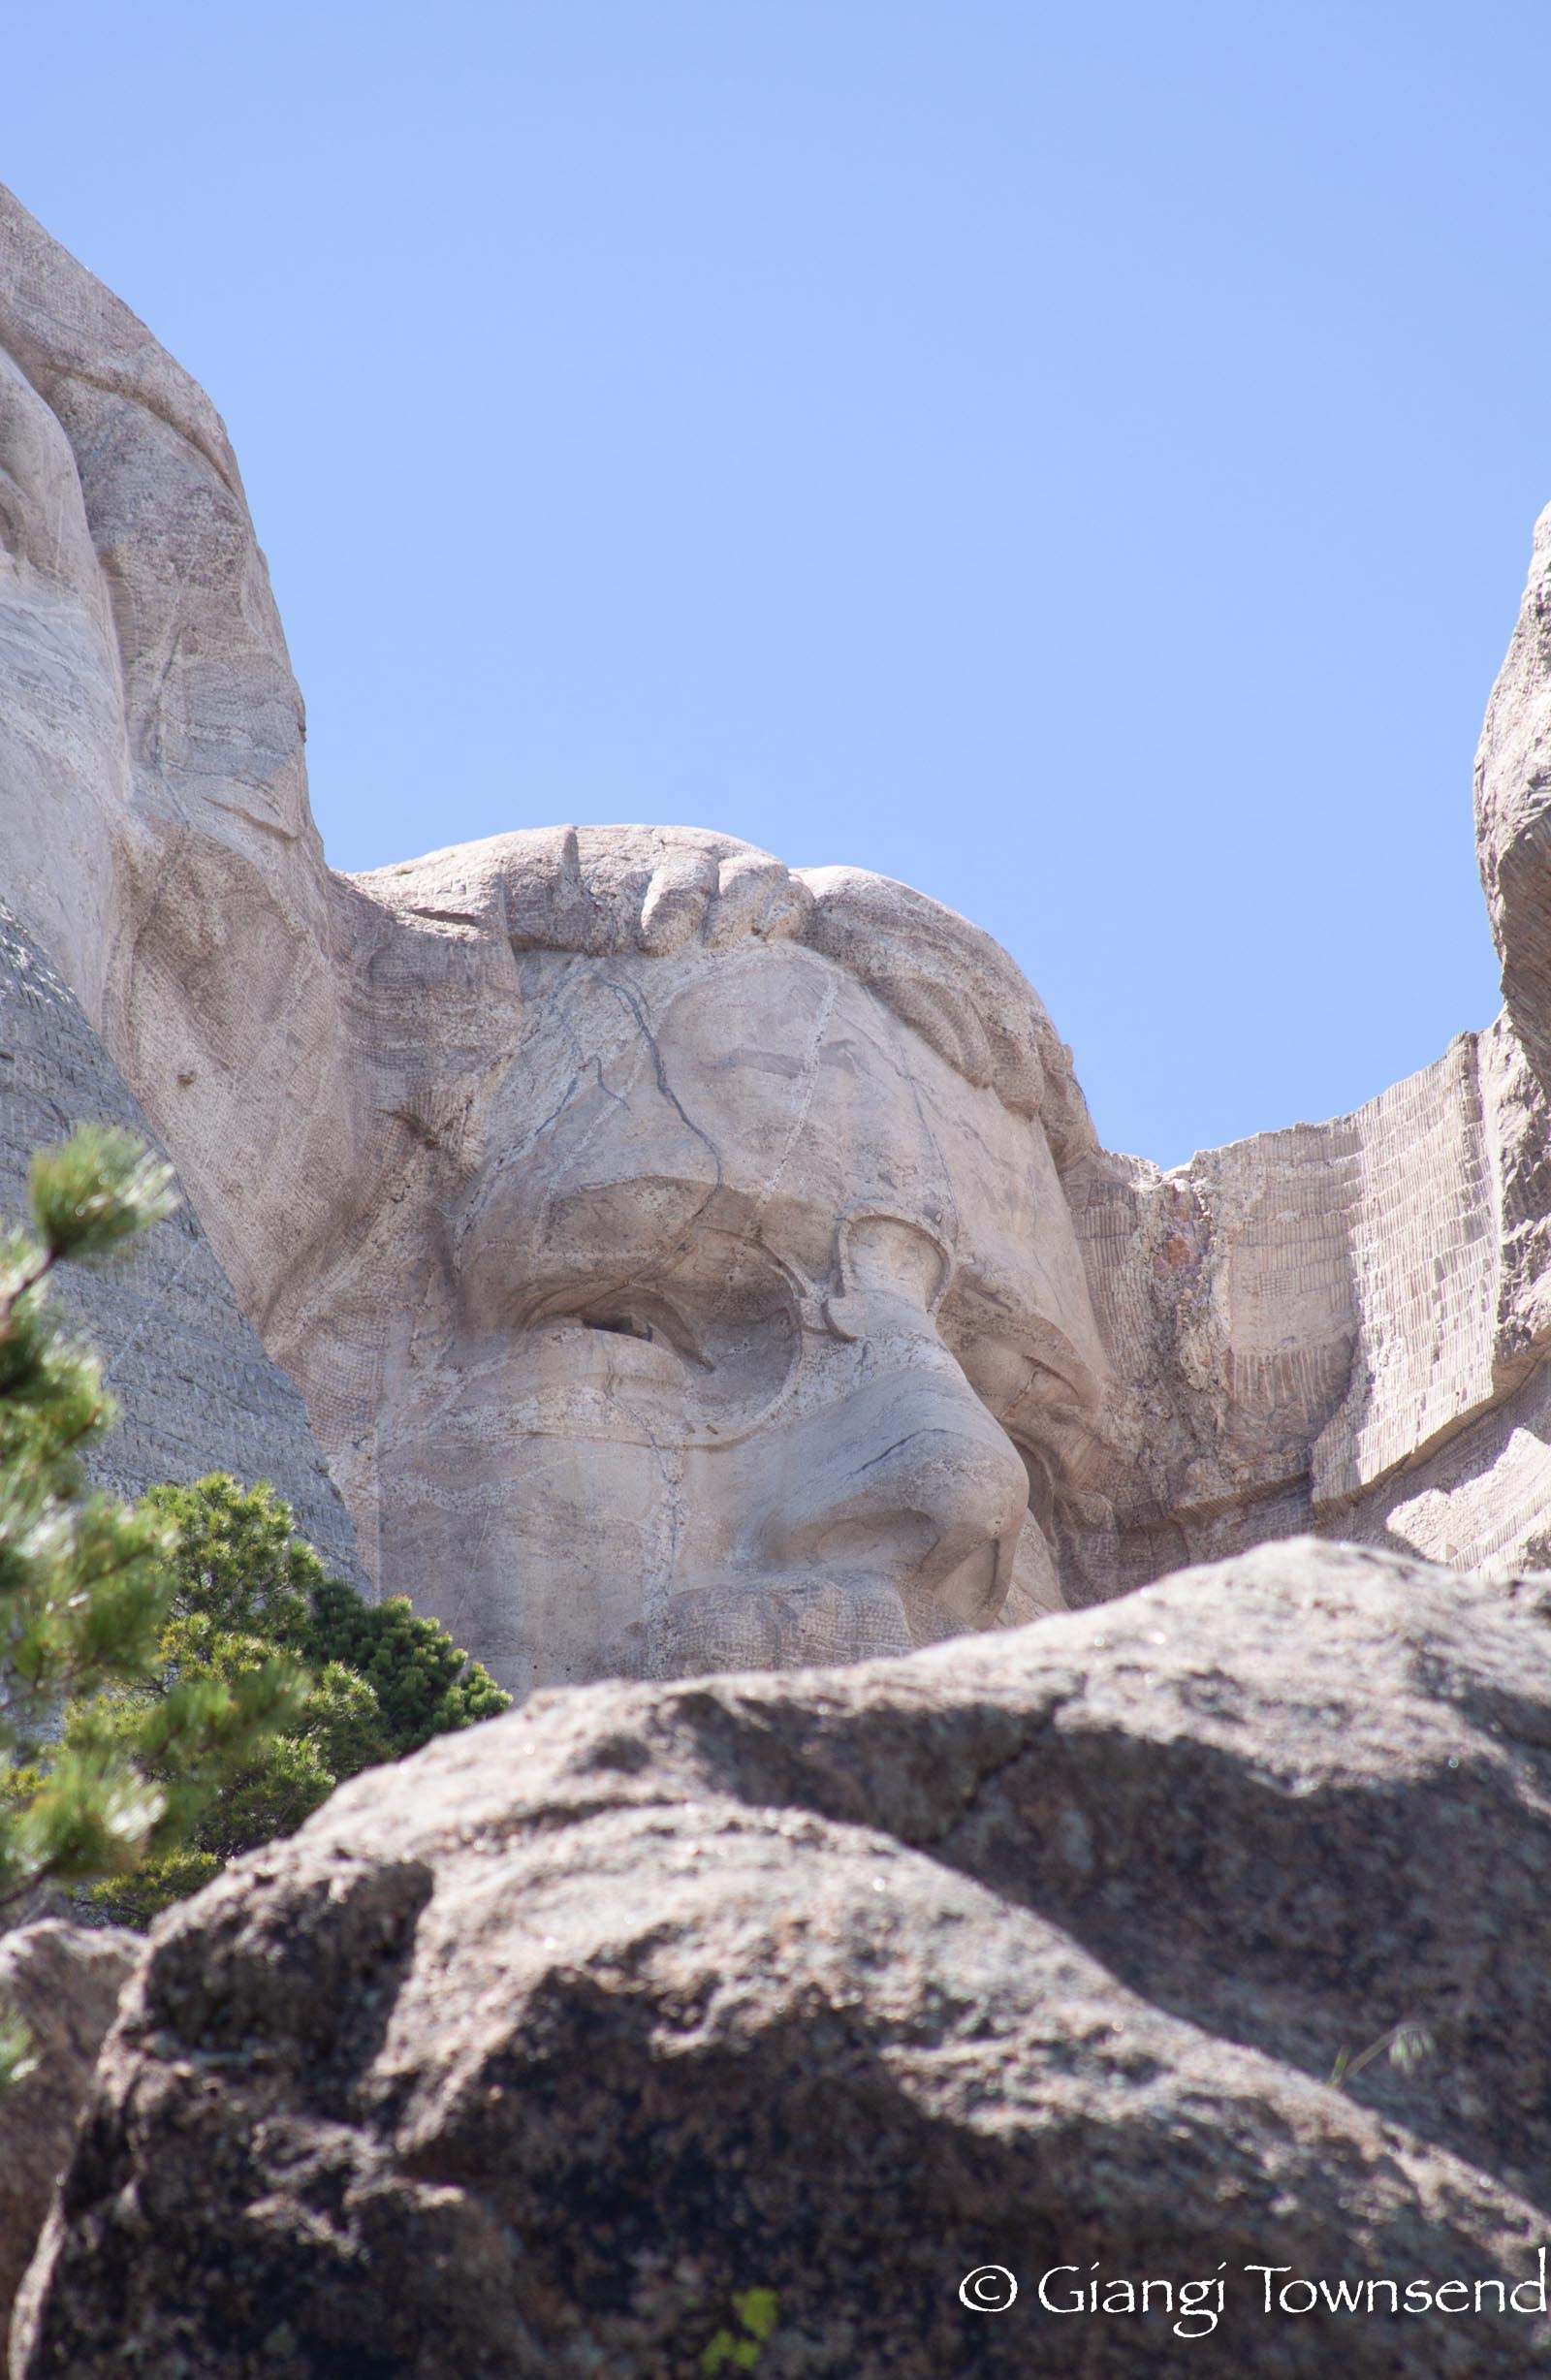 Mount Rushmore, What a site!